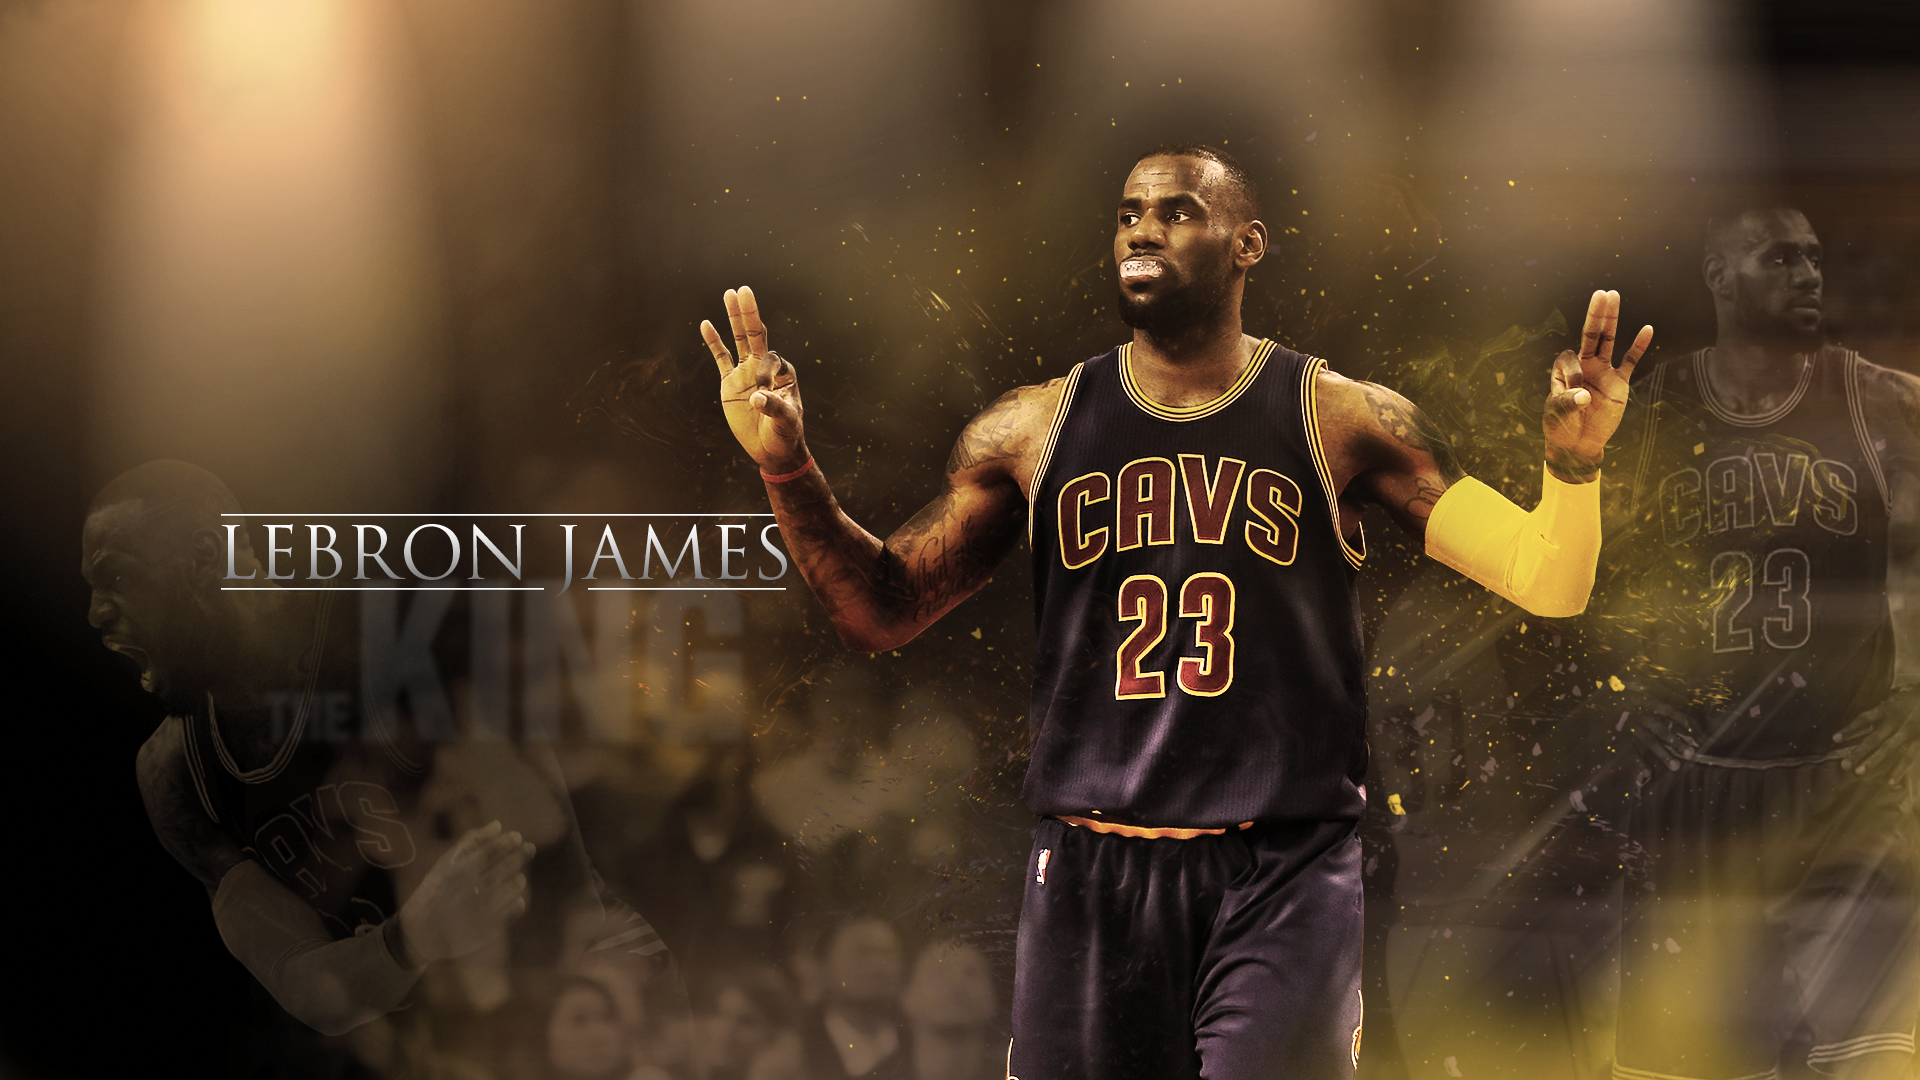 LeBron James Wallpaper (Cleveland Cavaliers) by ChasePS on DeviantArt